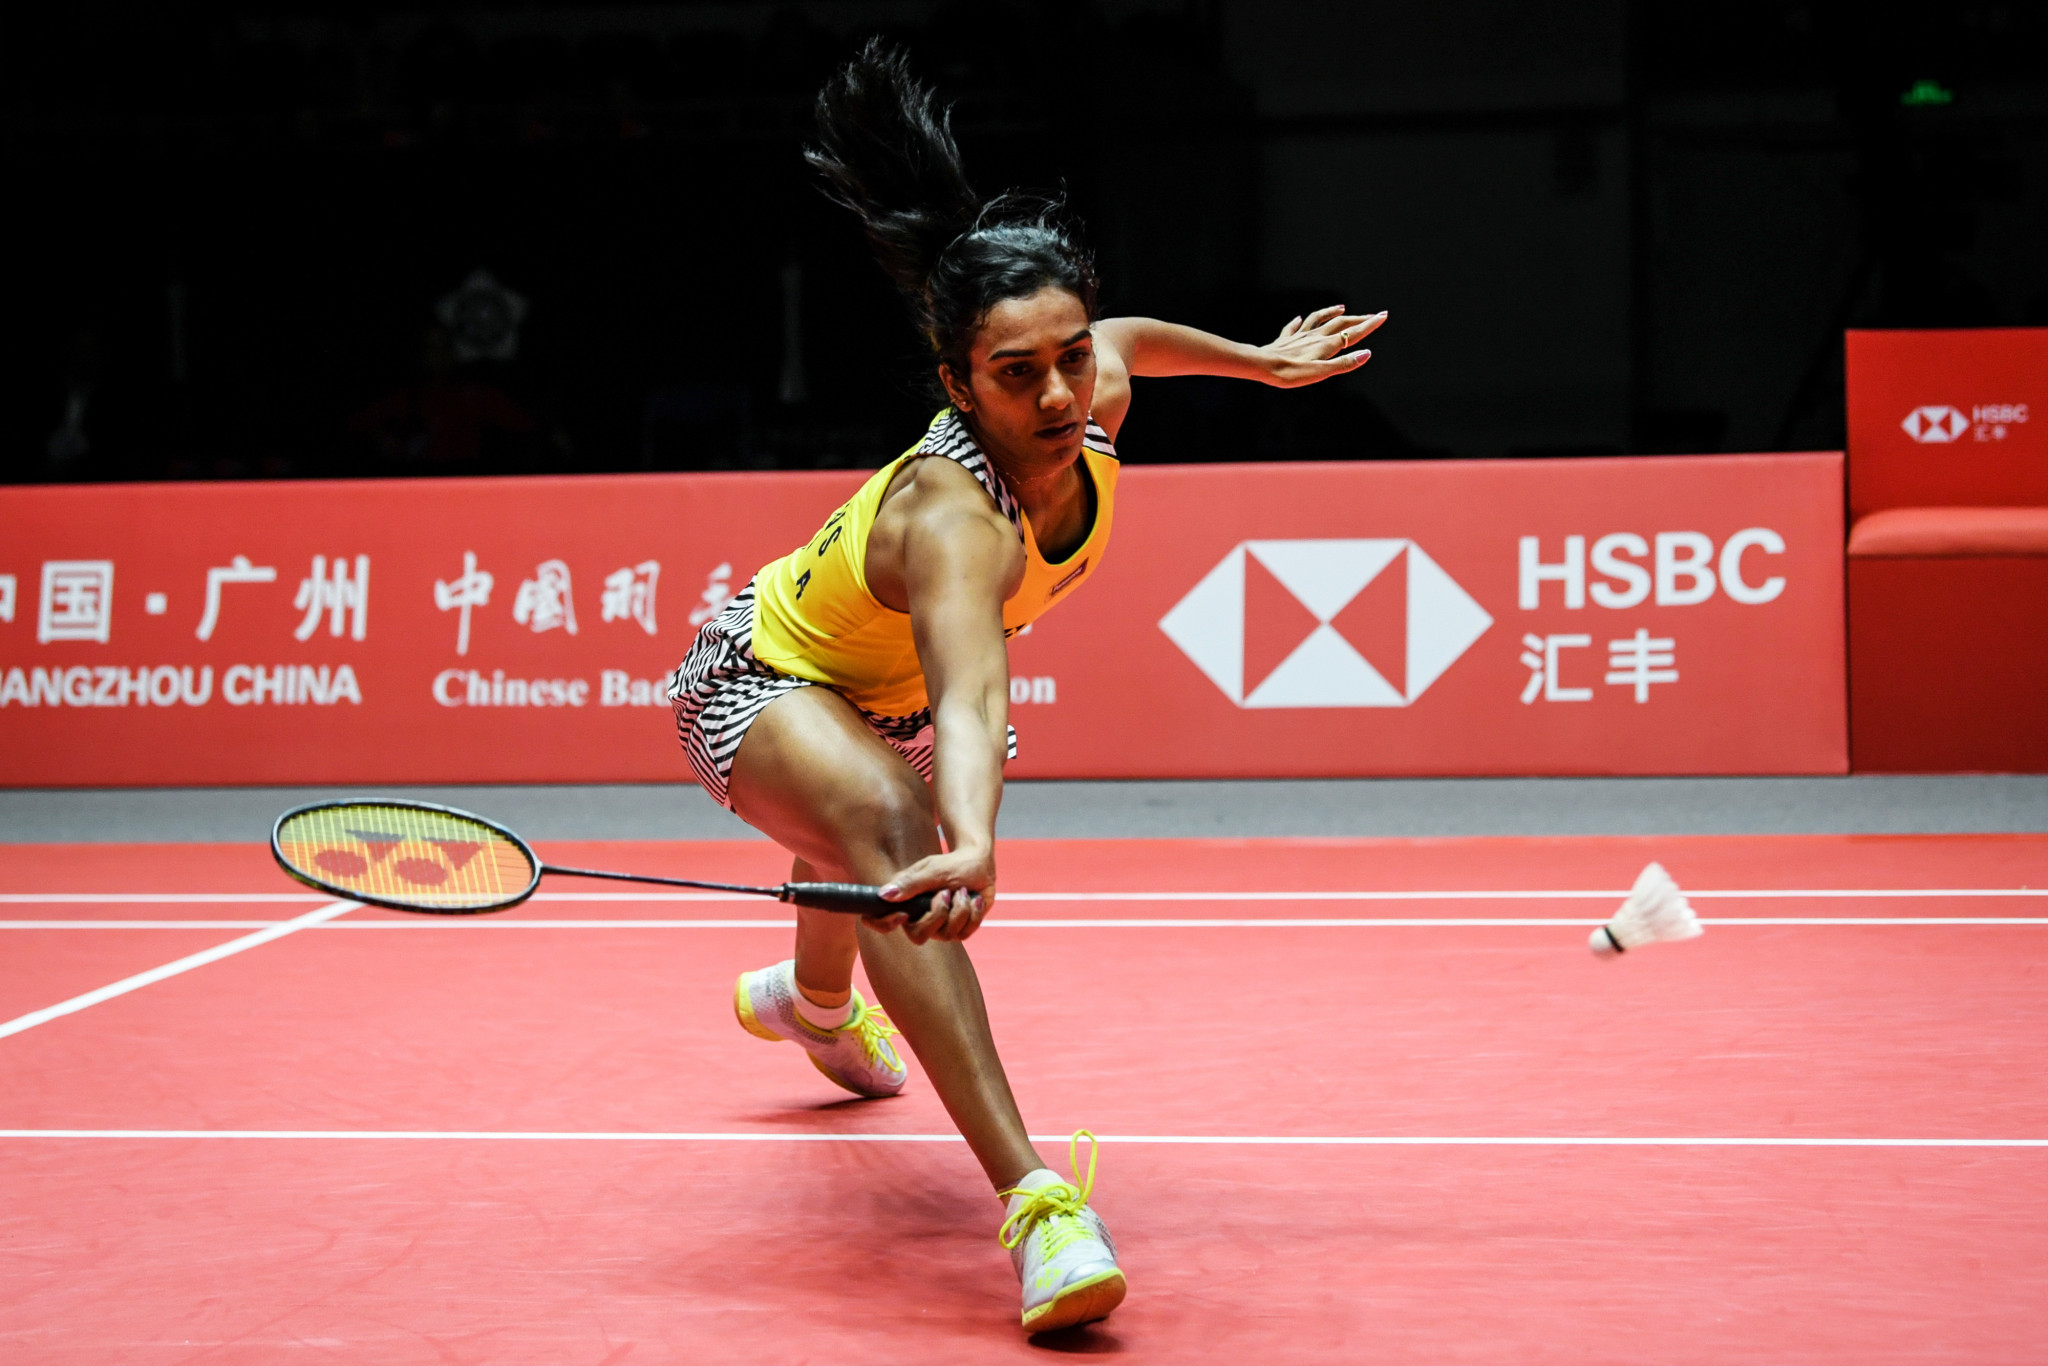 Perennial major silver medallist PV Sindhu moved into the women's final ©Getty Images